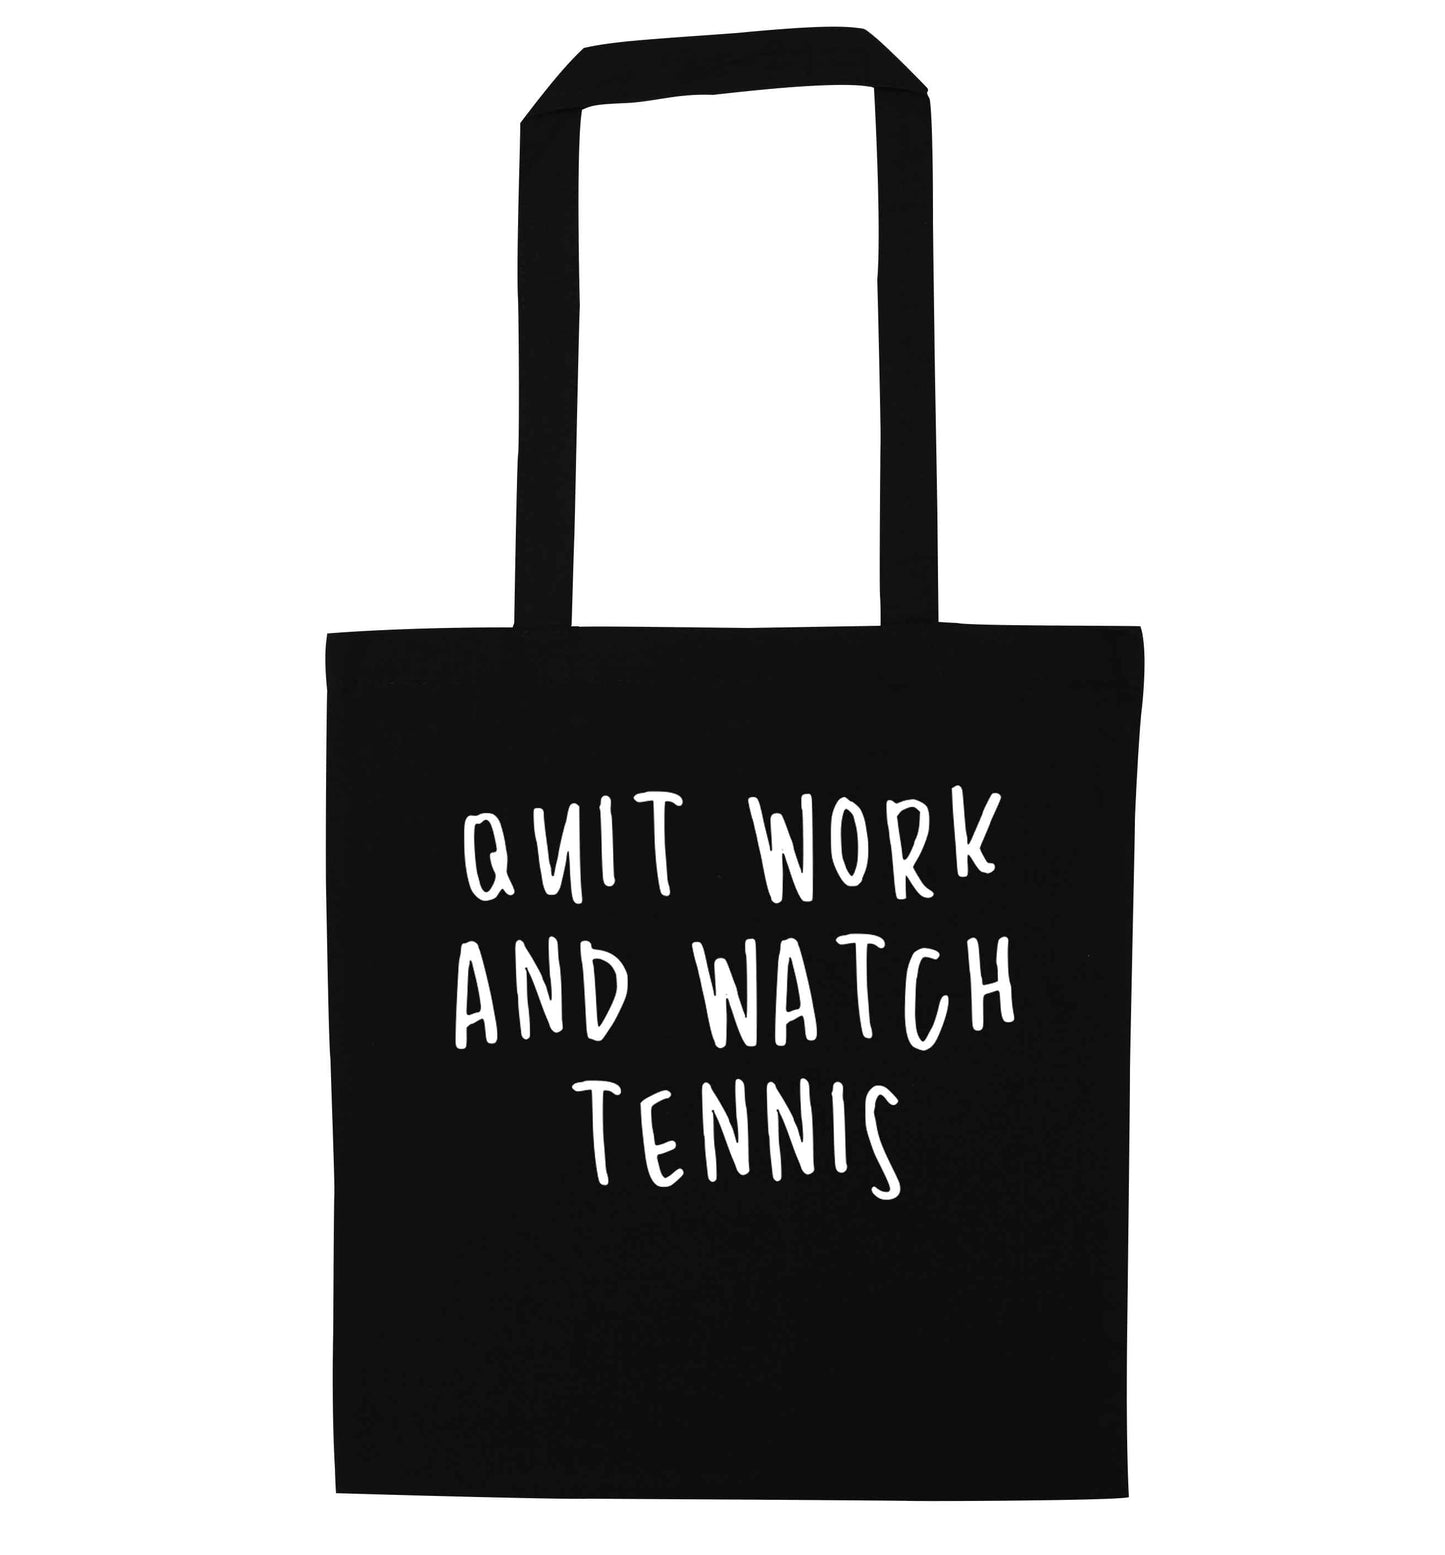 Quit work and watch tennis black tote bag